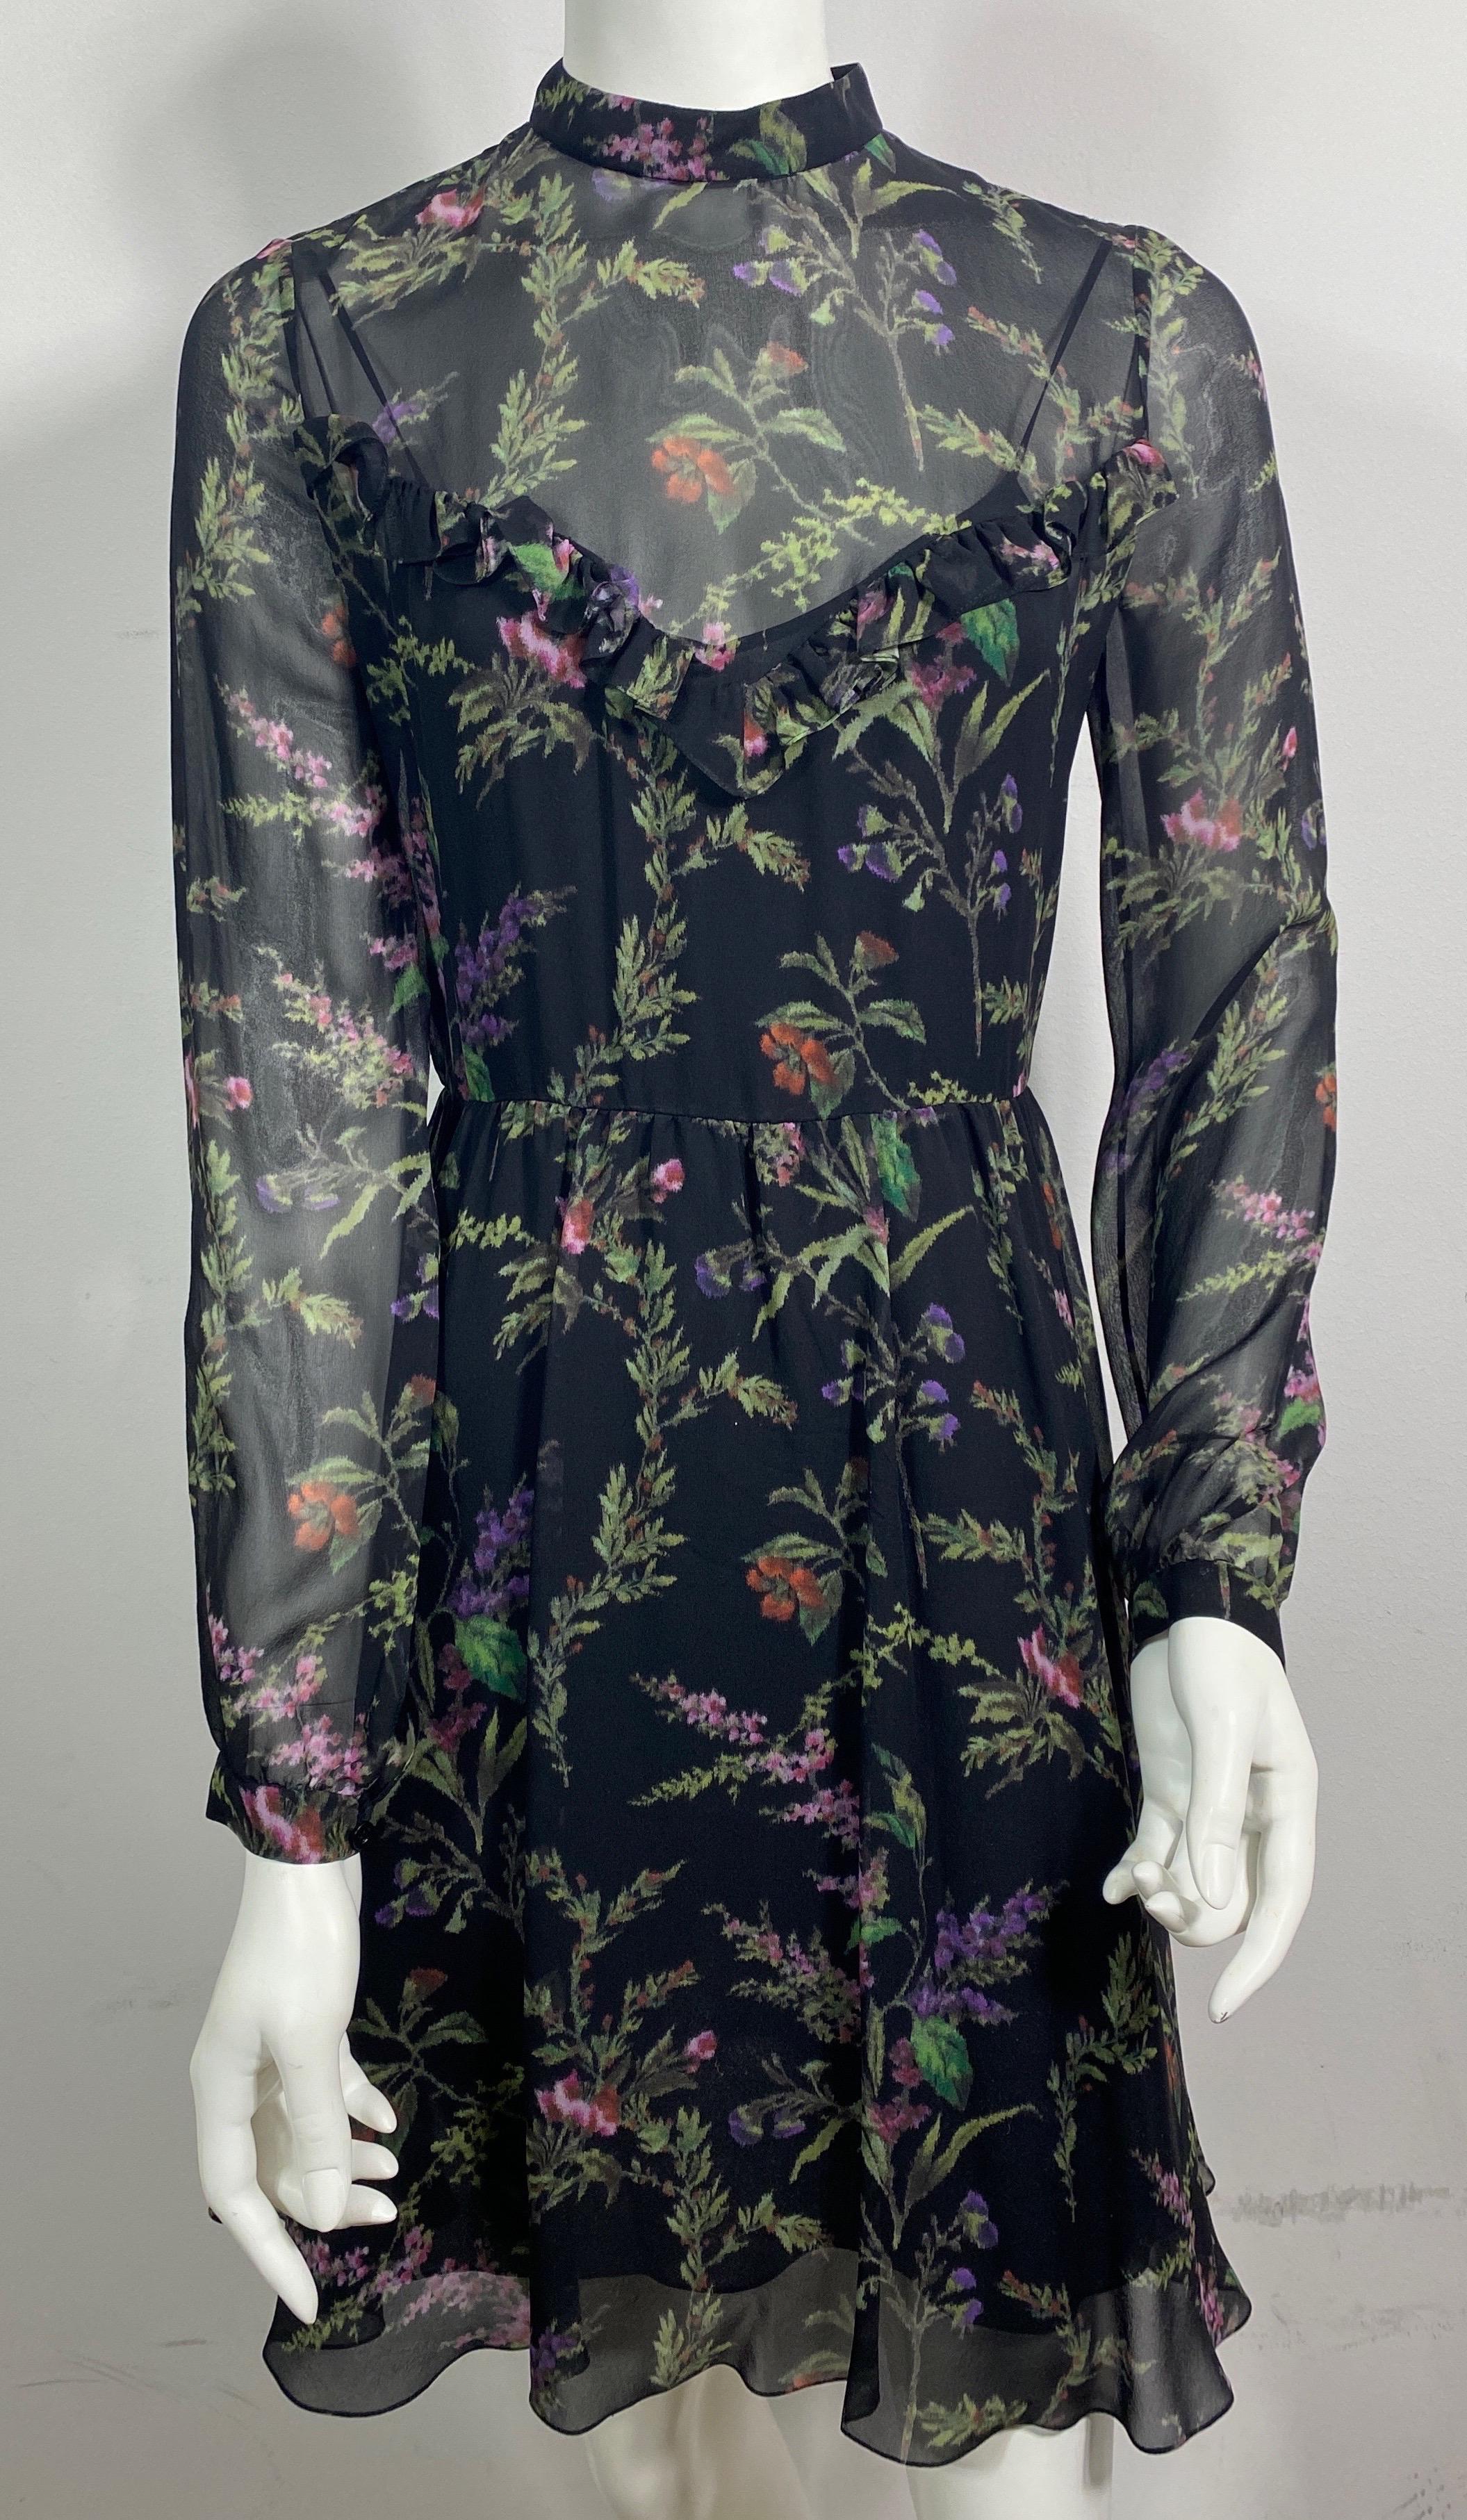 Christian Dior Black Floral Print Silk Chiffon Long Sleeve Dress - Size 36  This transparent silk chiffon floral print dress has a black silk slip with spaghetti straps, some stretch and a 15” side zip. The dress itself has long sleeves with a